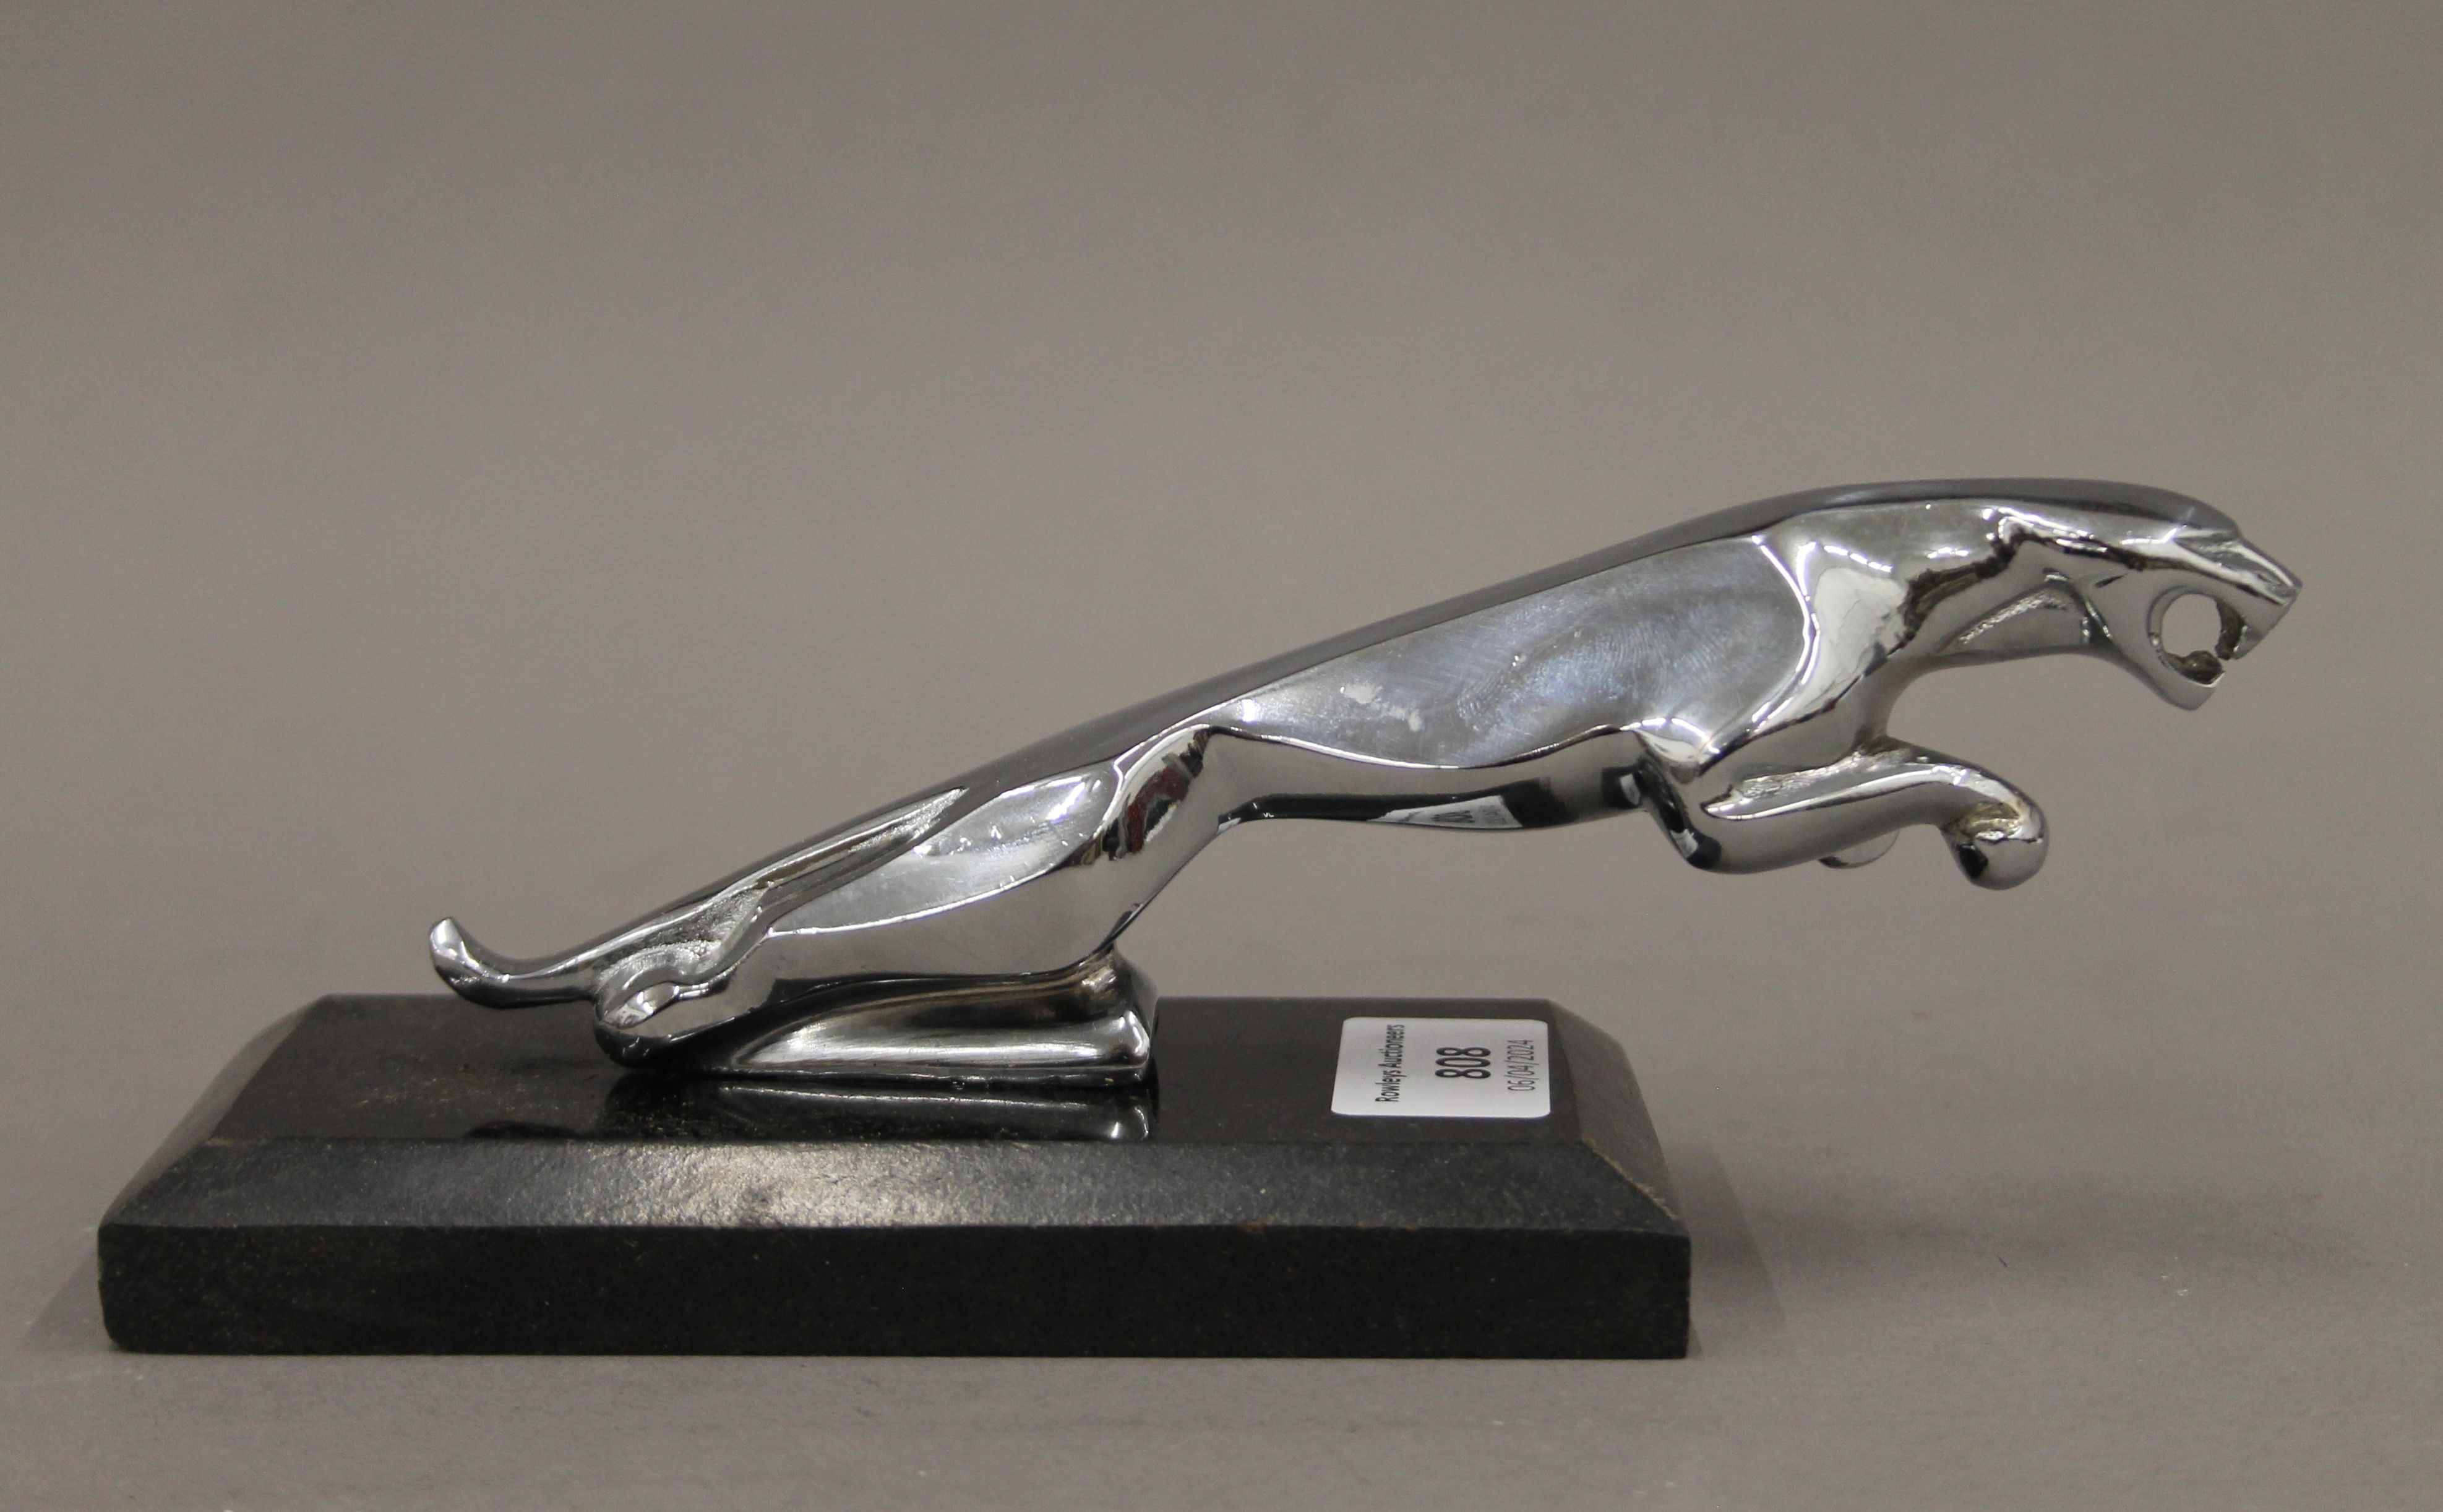 A jaguar car mascot on stand. 21 cm long overall. - Image 2 of 3